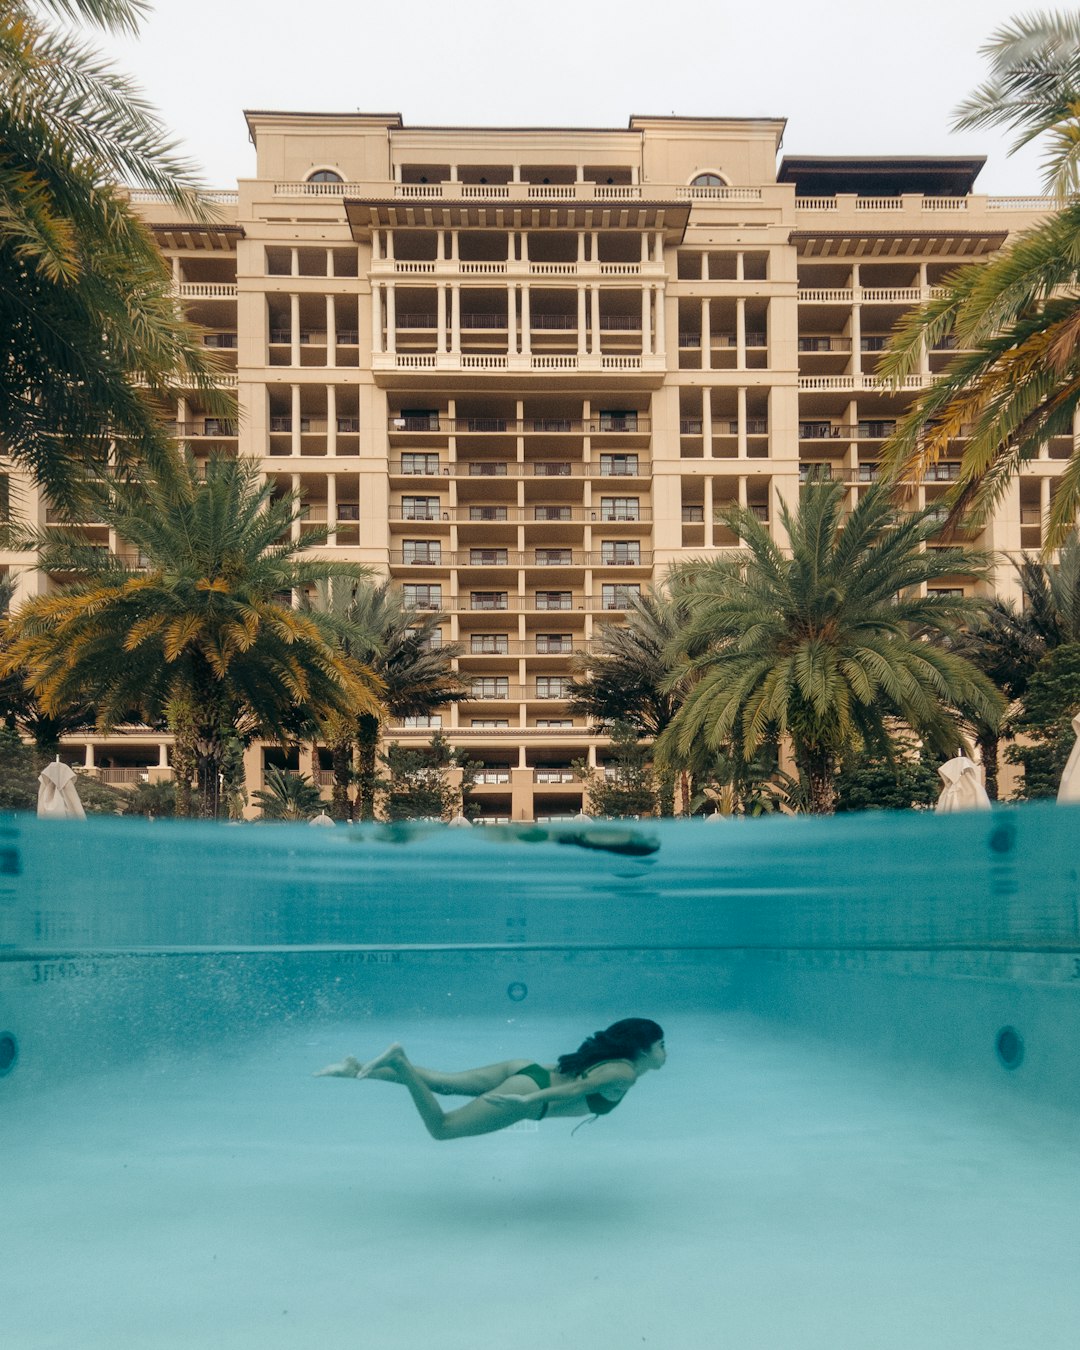 man in swimming pool near palm trees and building during daytime